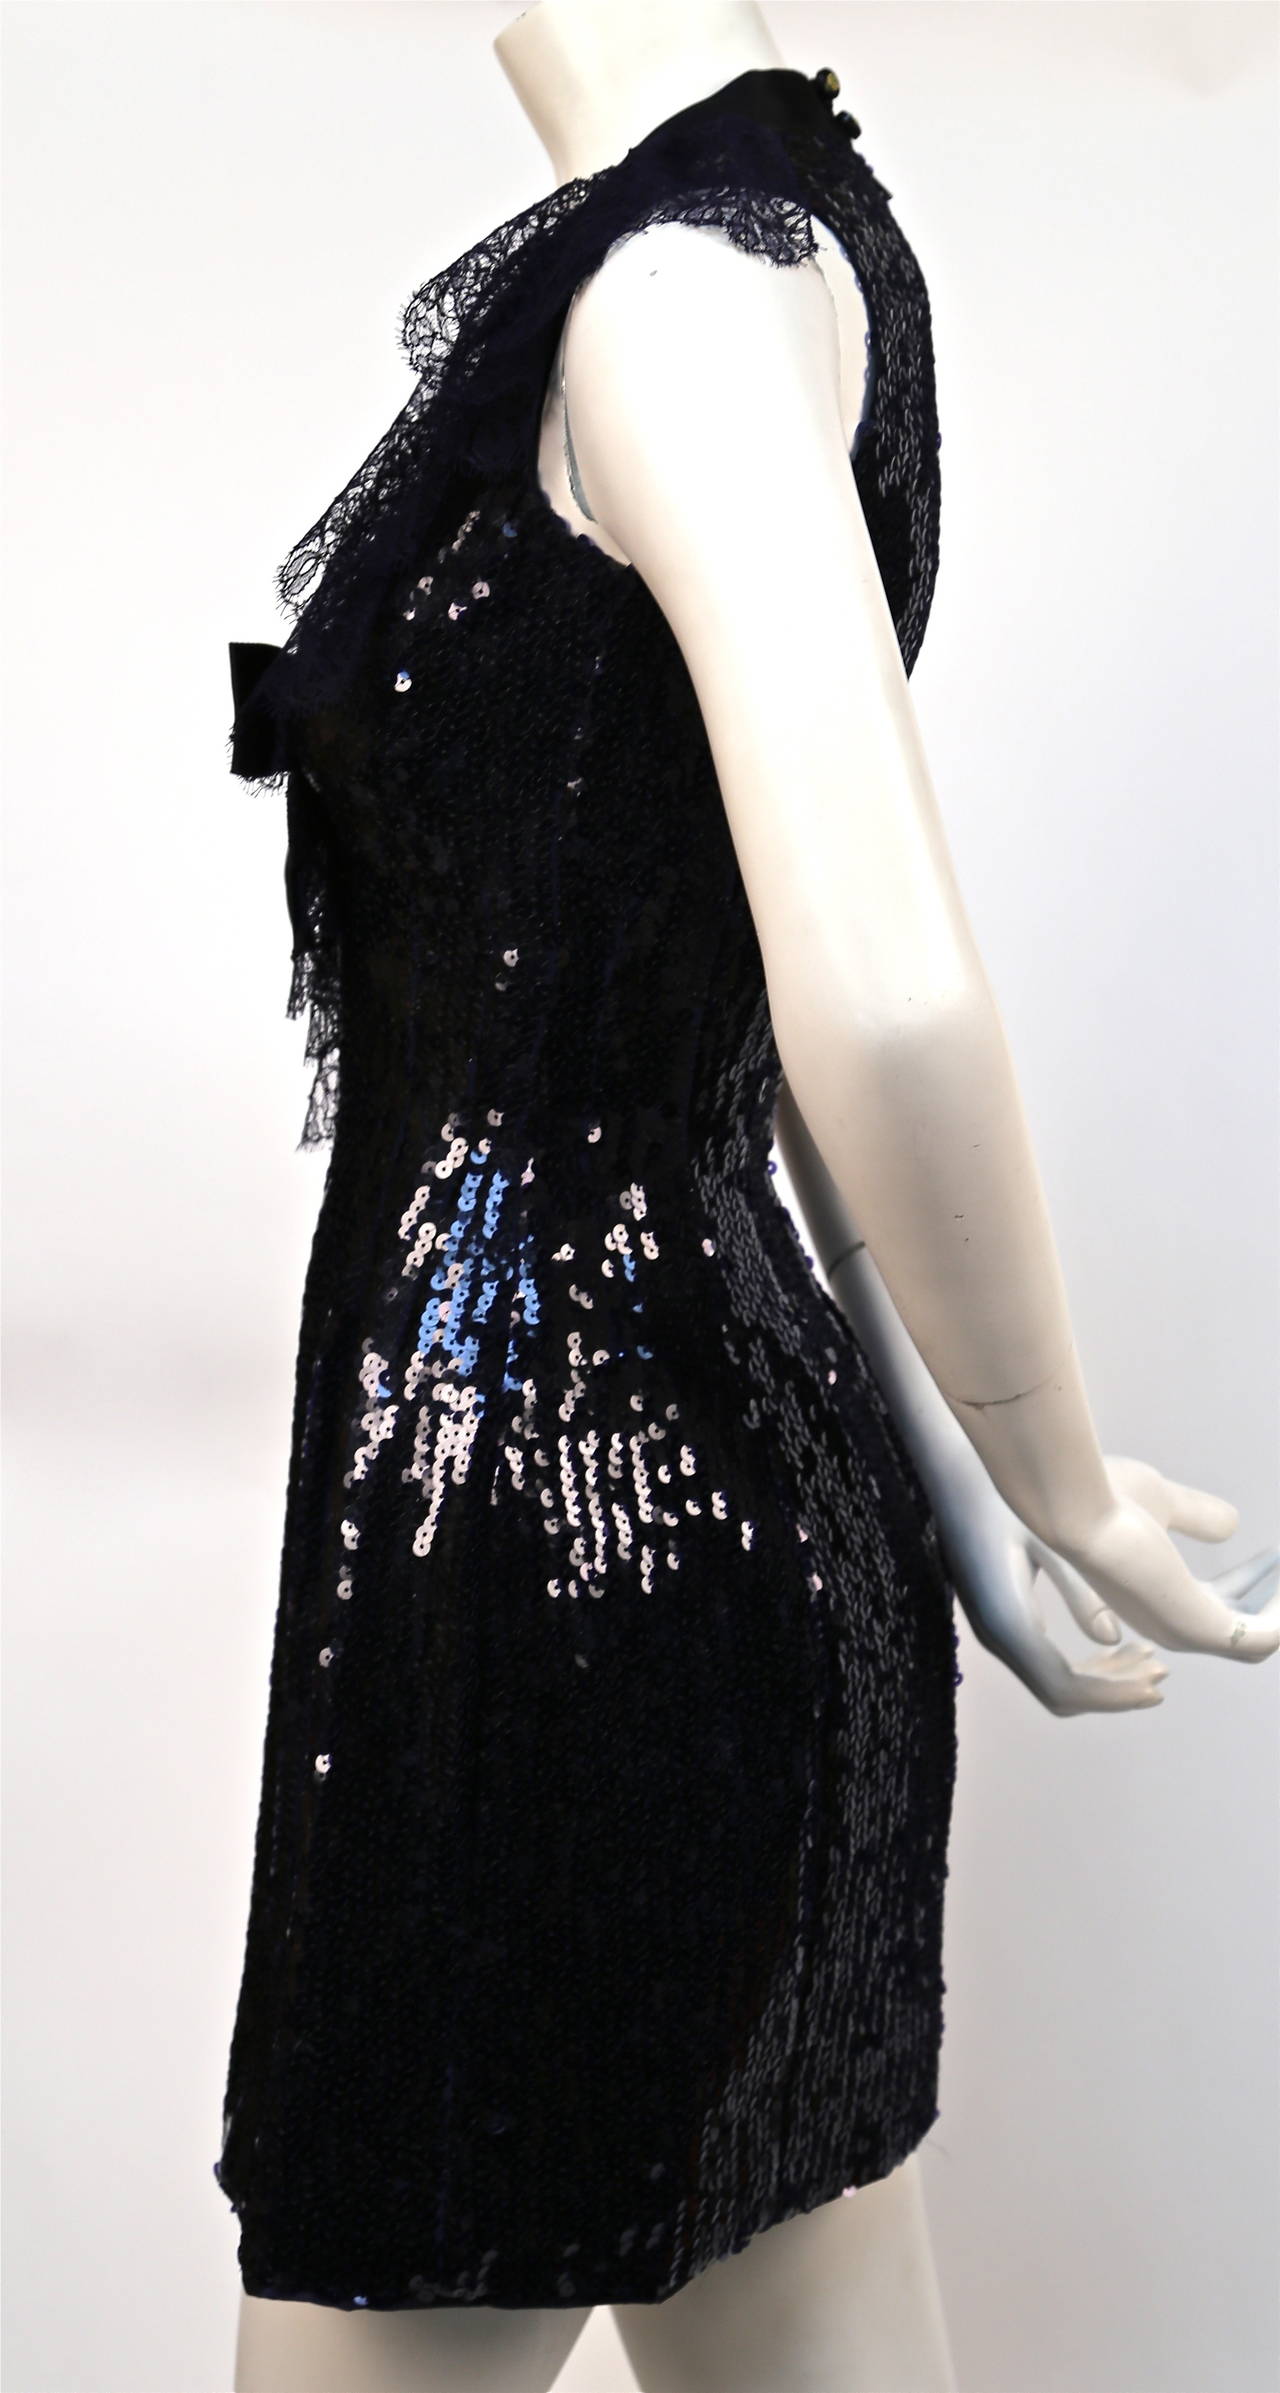 Women's 1987 CHANEL navy blue sequined mini dress with chantilly lace collar & satin bow